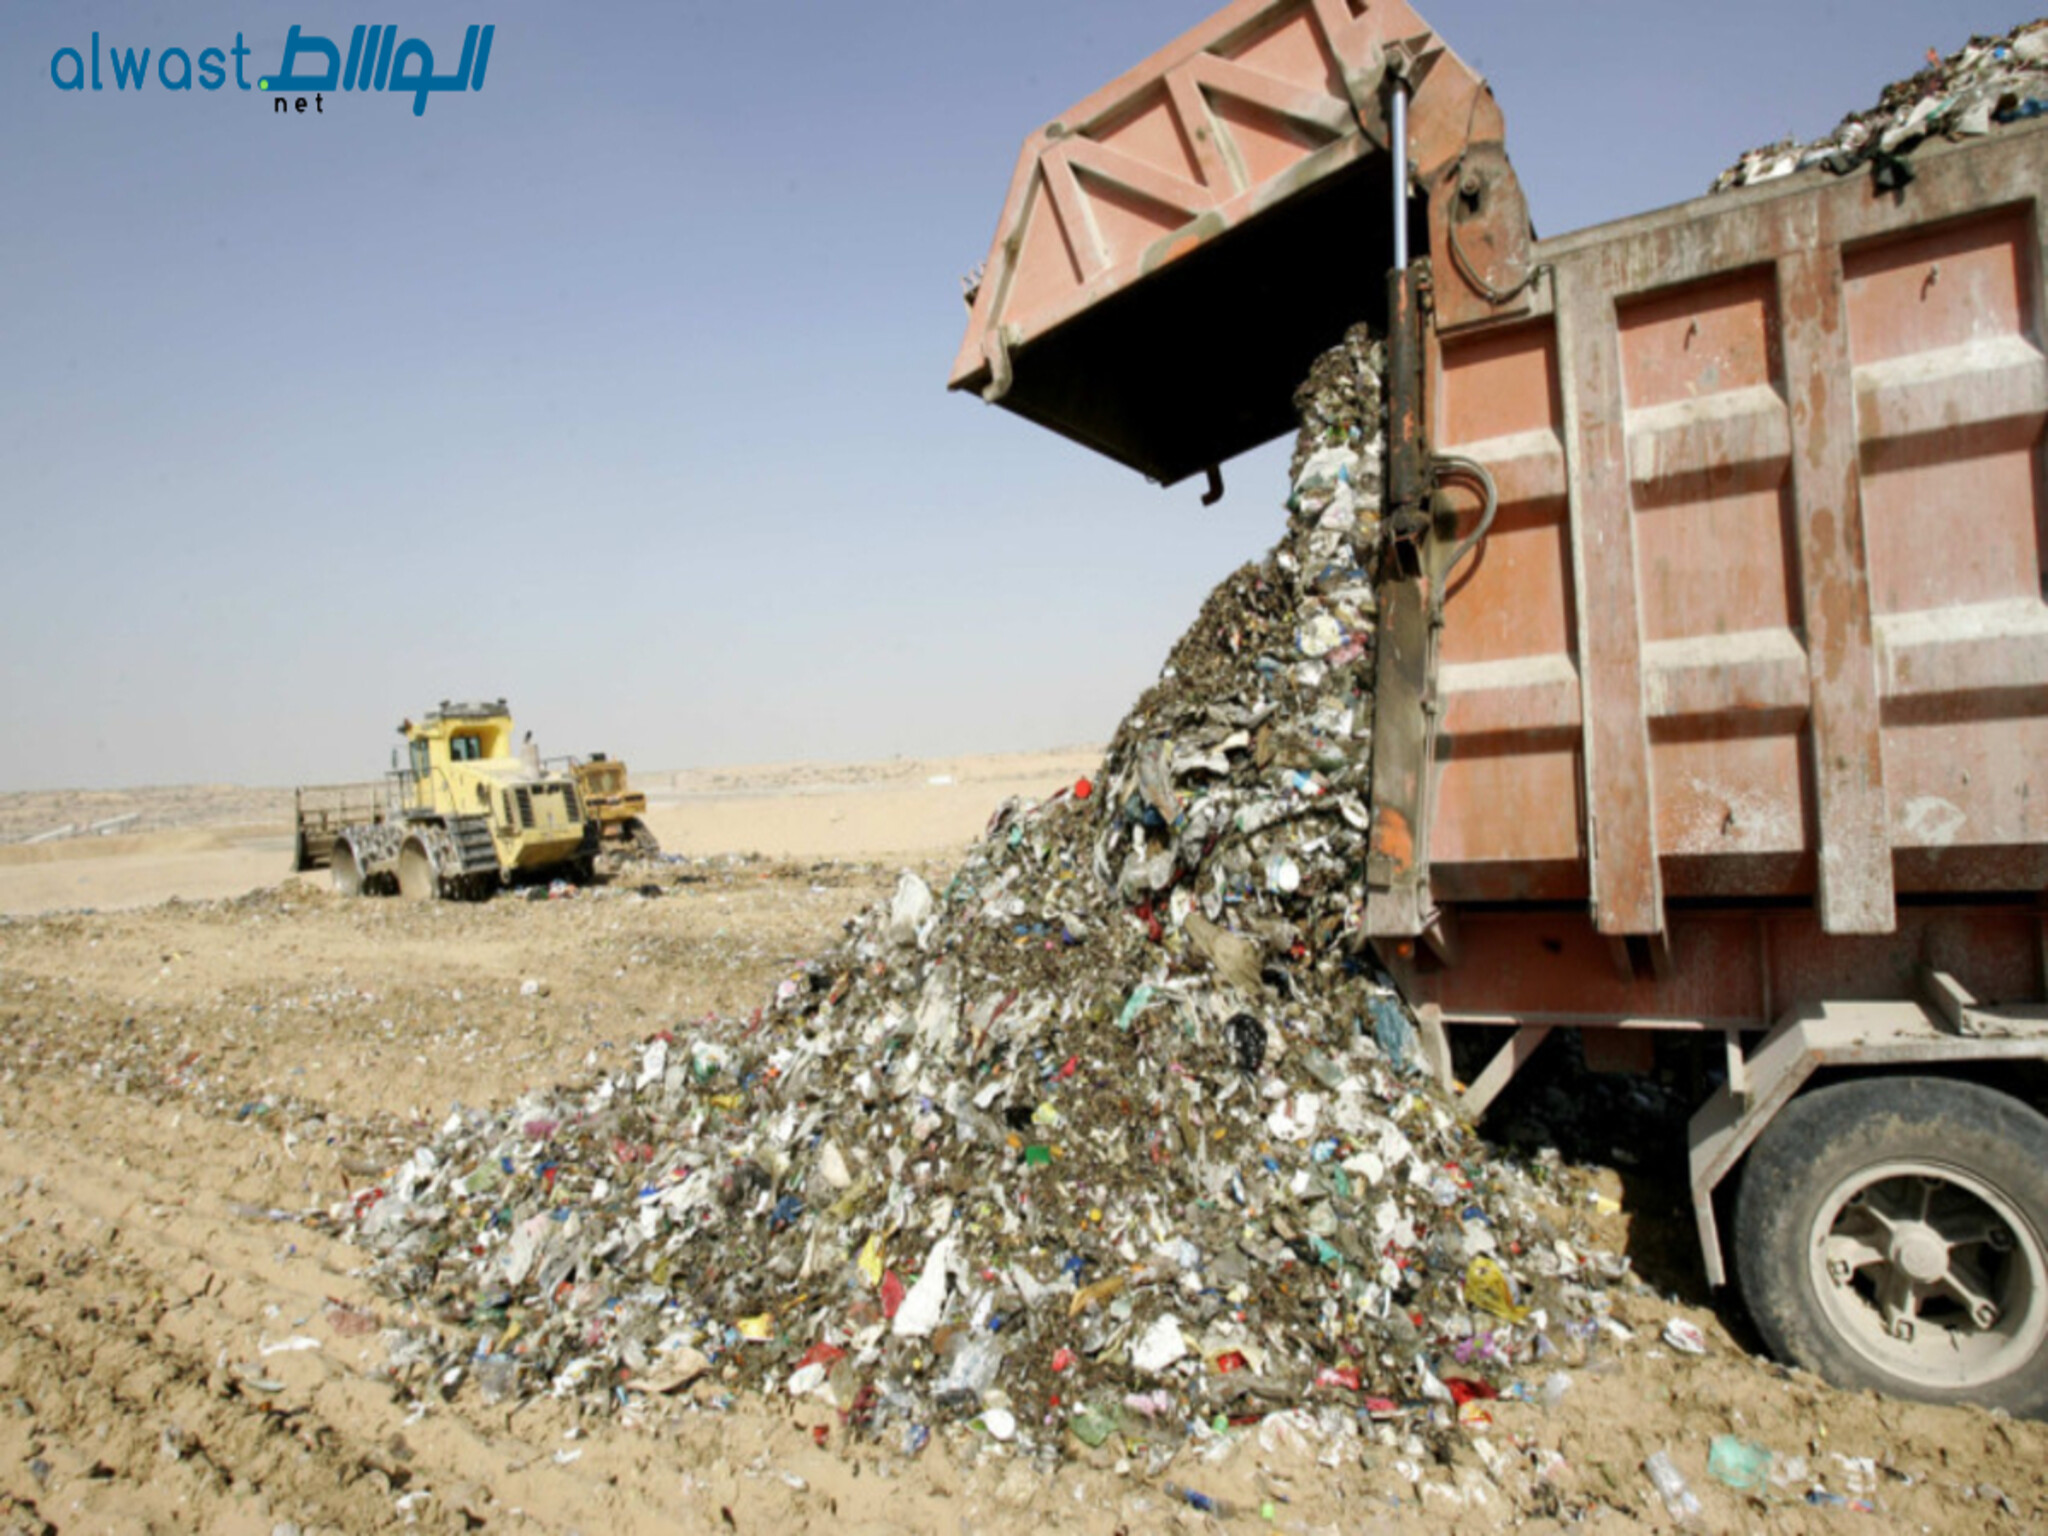 A UAE court fined a company Dh20,000 for dumping waste illegally in Ajman